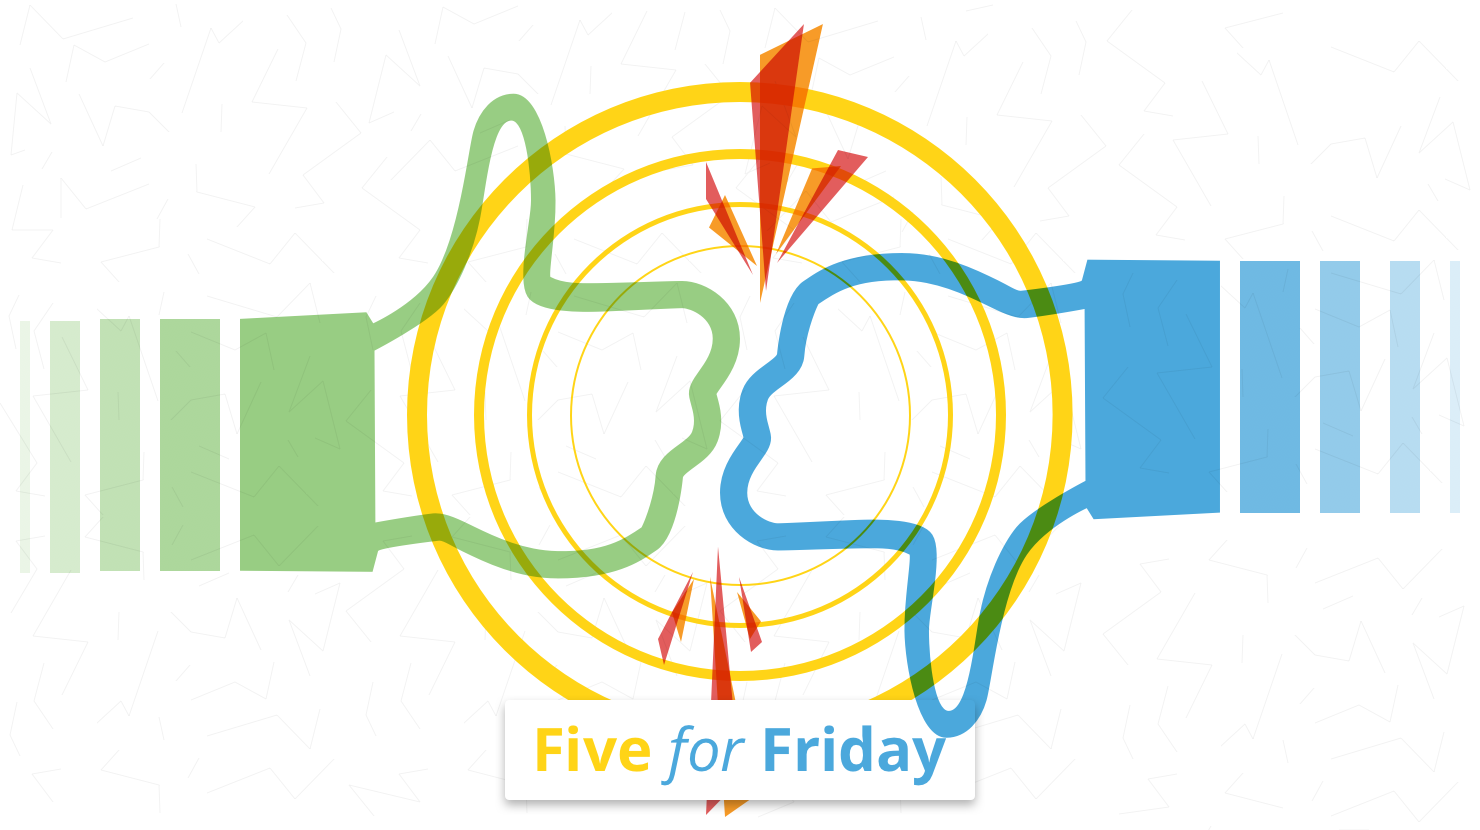 Five for Friday: Giving feedback